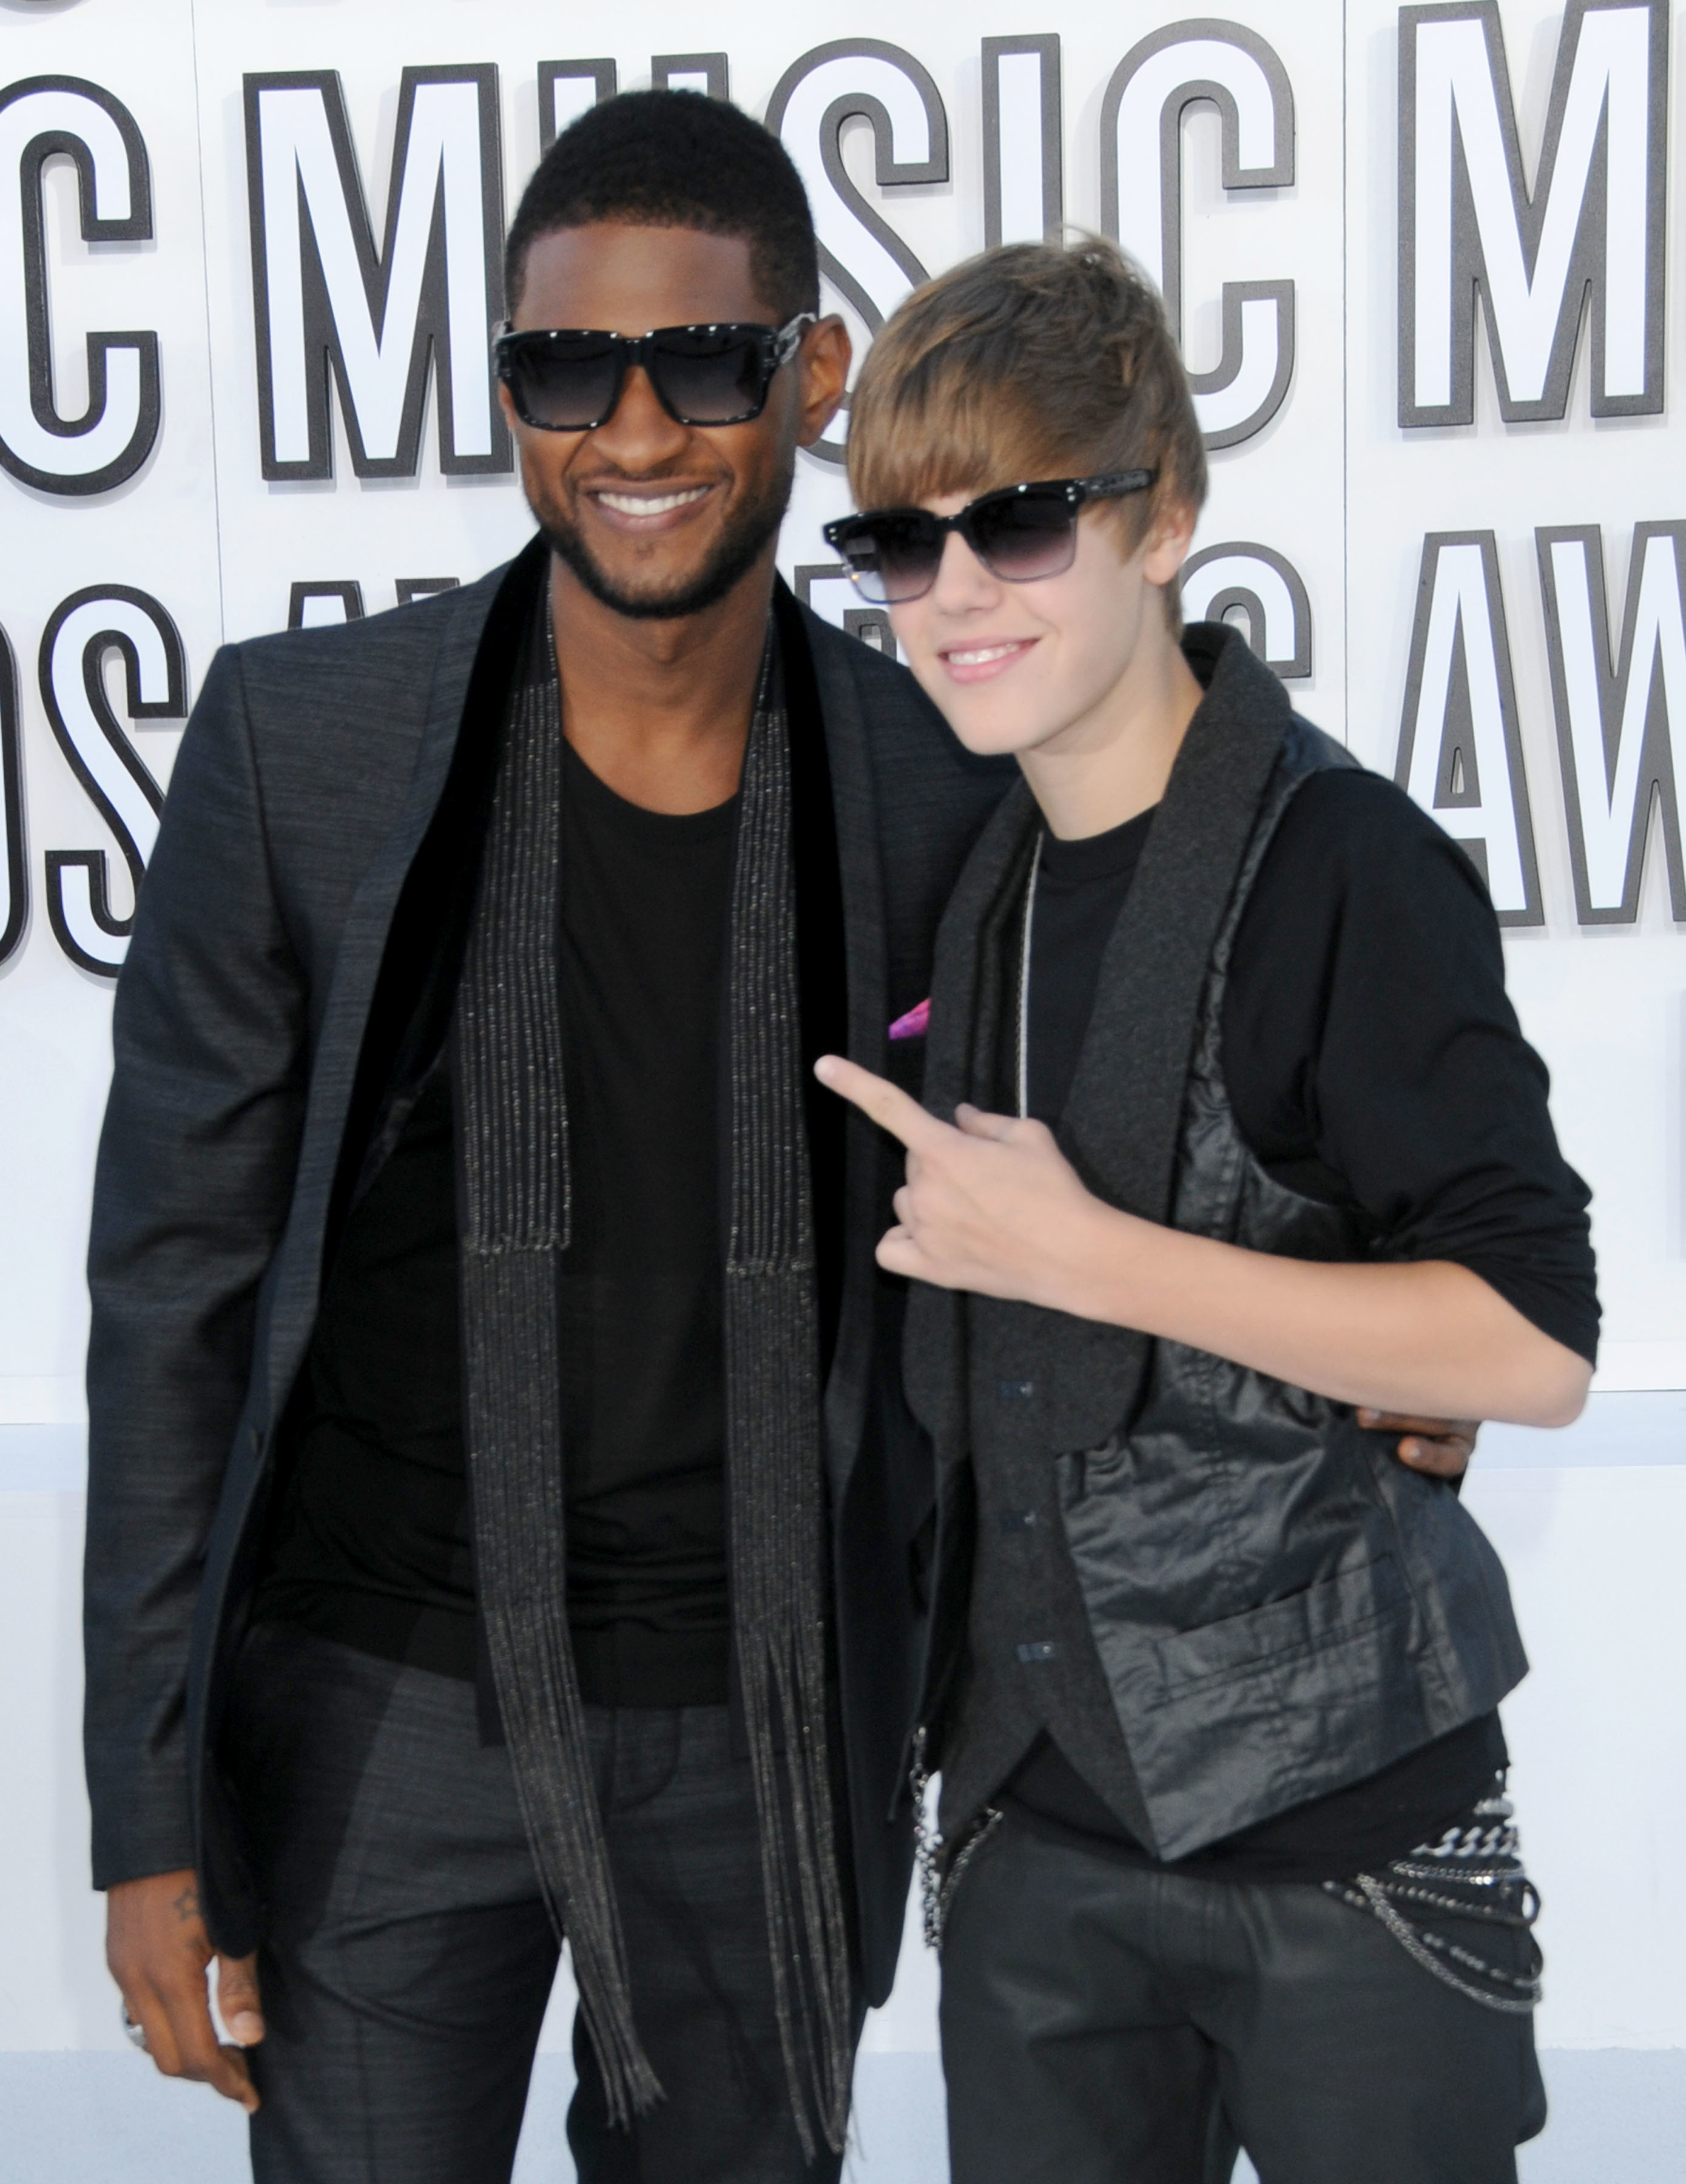 Usher in a black suit with a scarf and Justin Bieber in a black outfit with a vest posing at an awards event